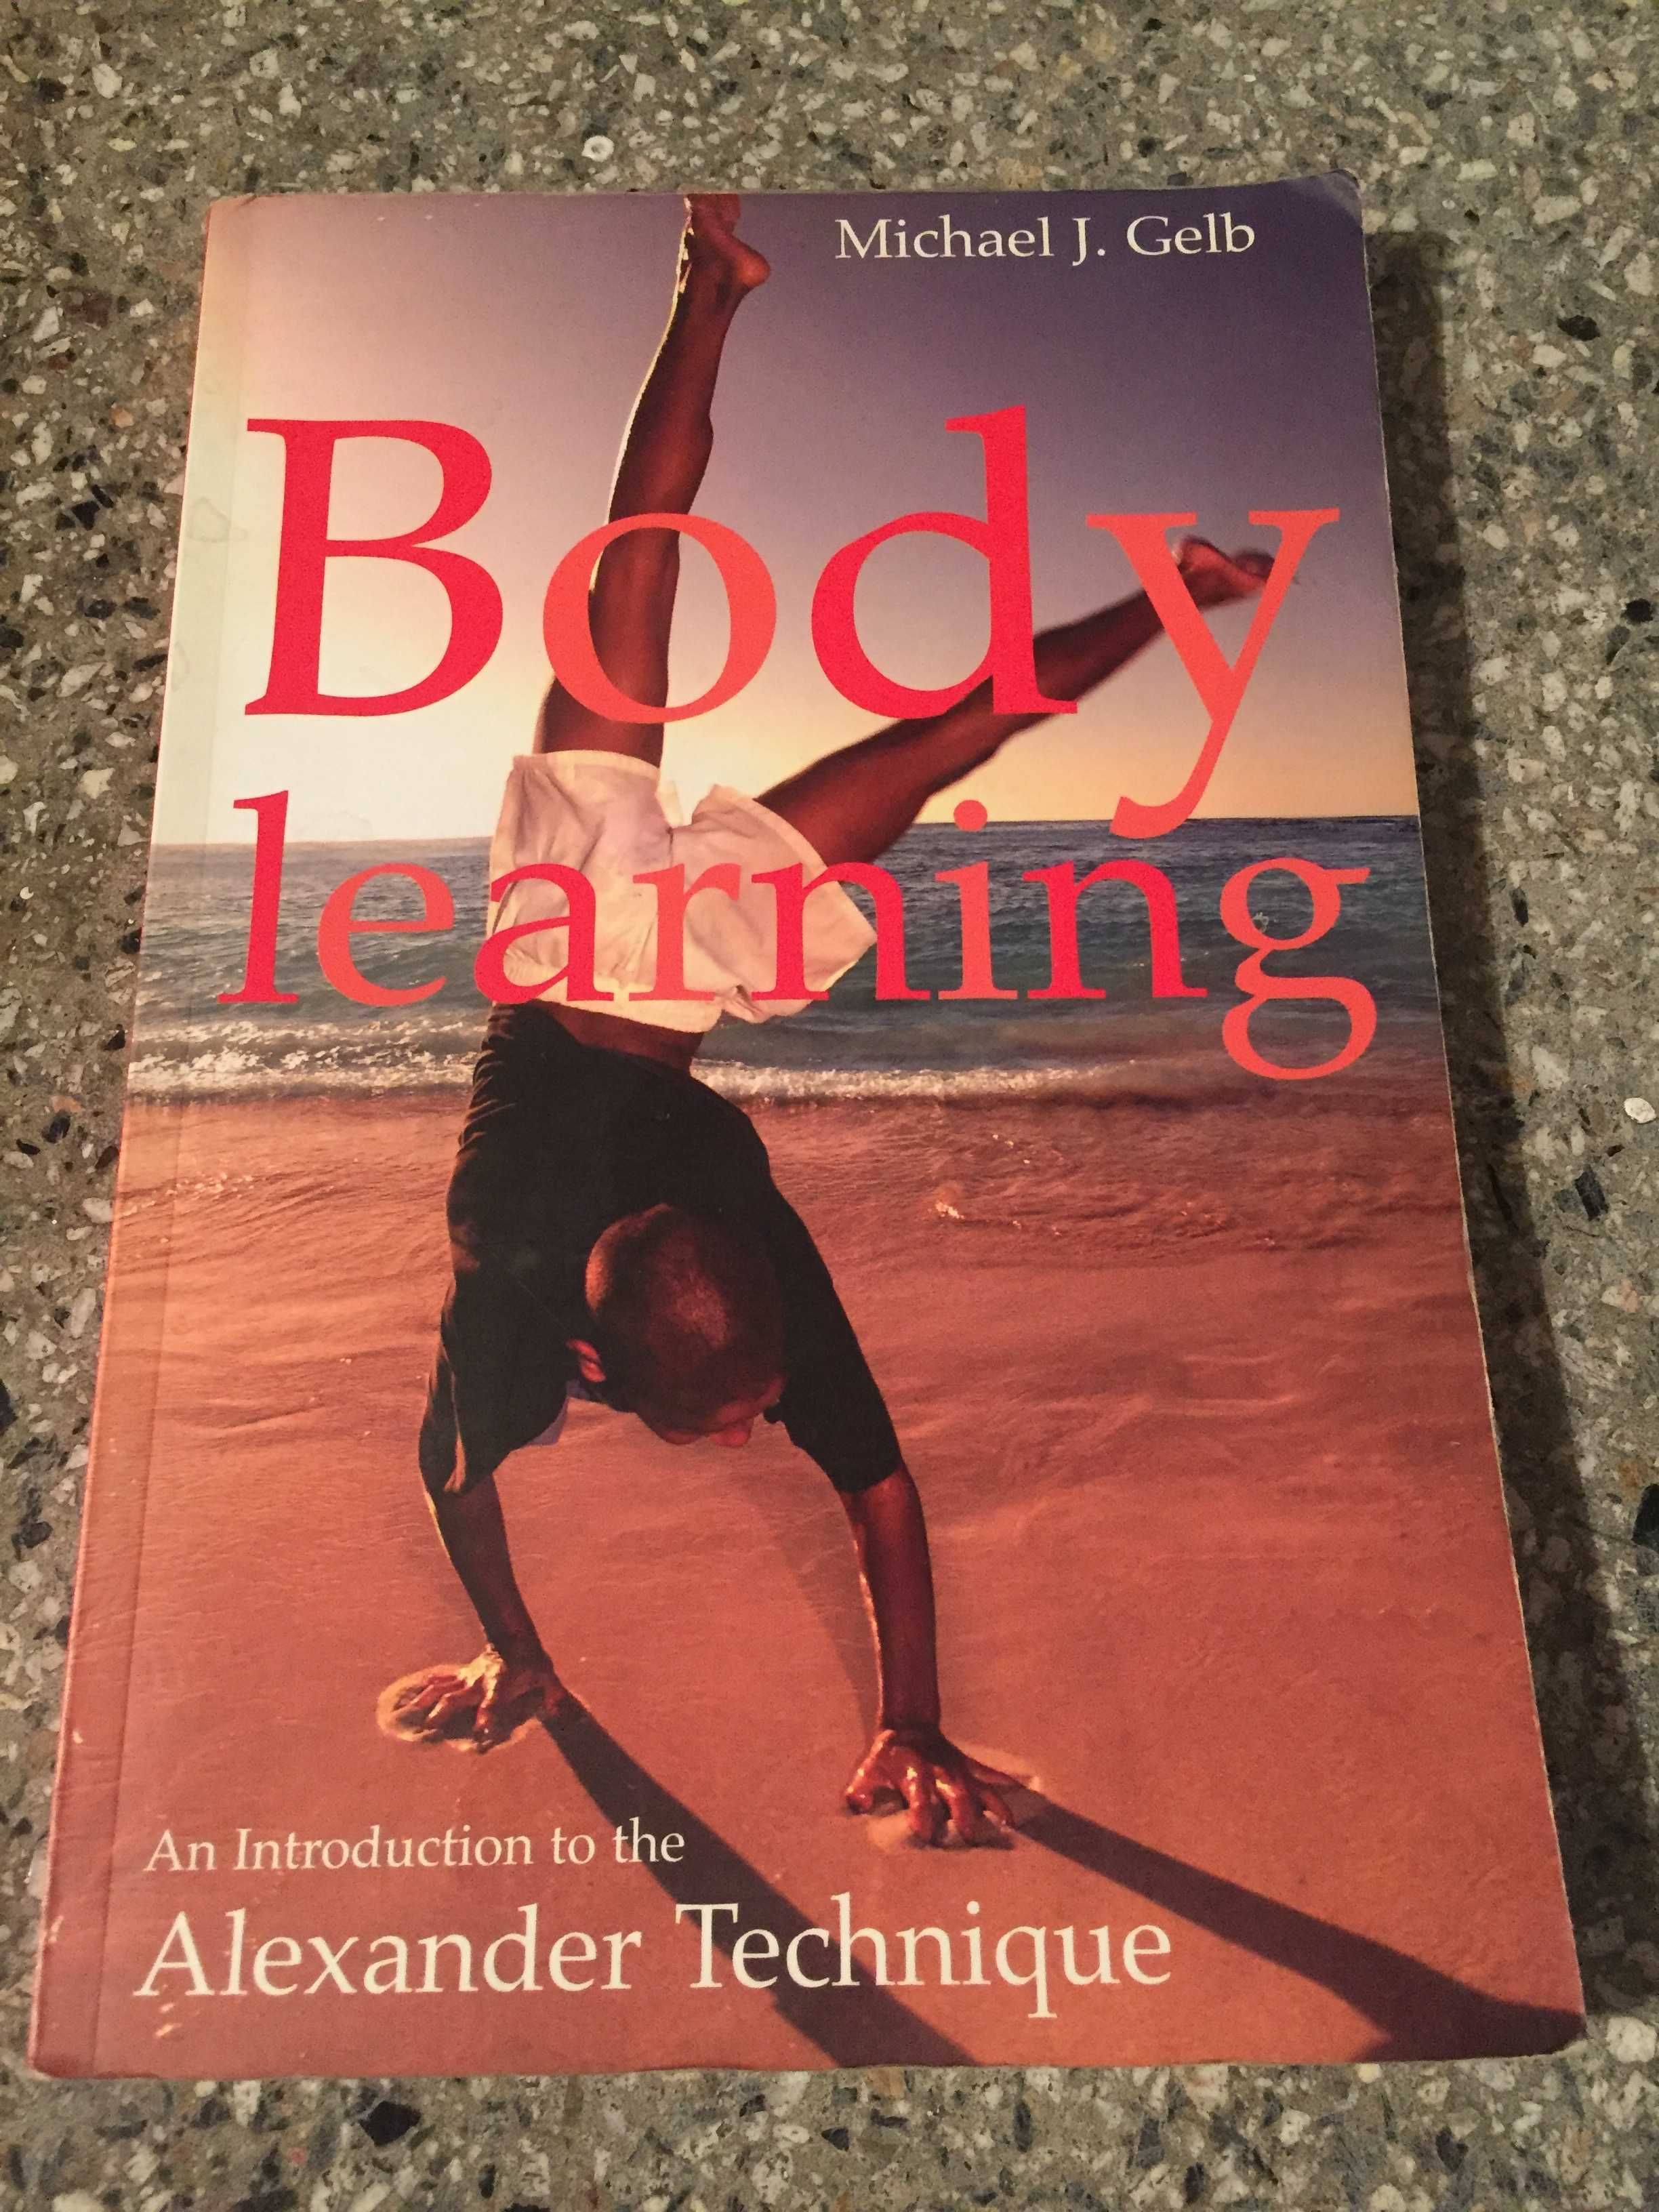 M. J. Gelb "Body Learning. An Introduction to the Alexander Technique"